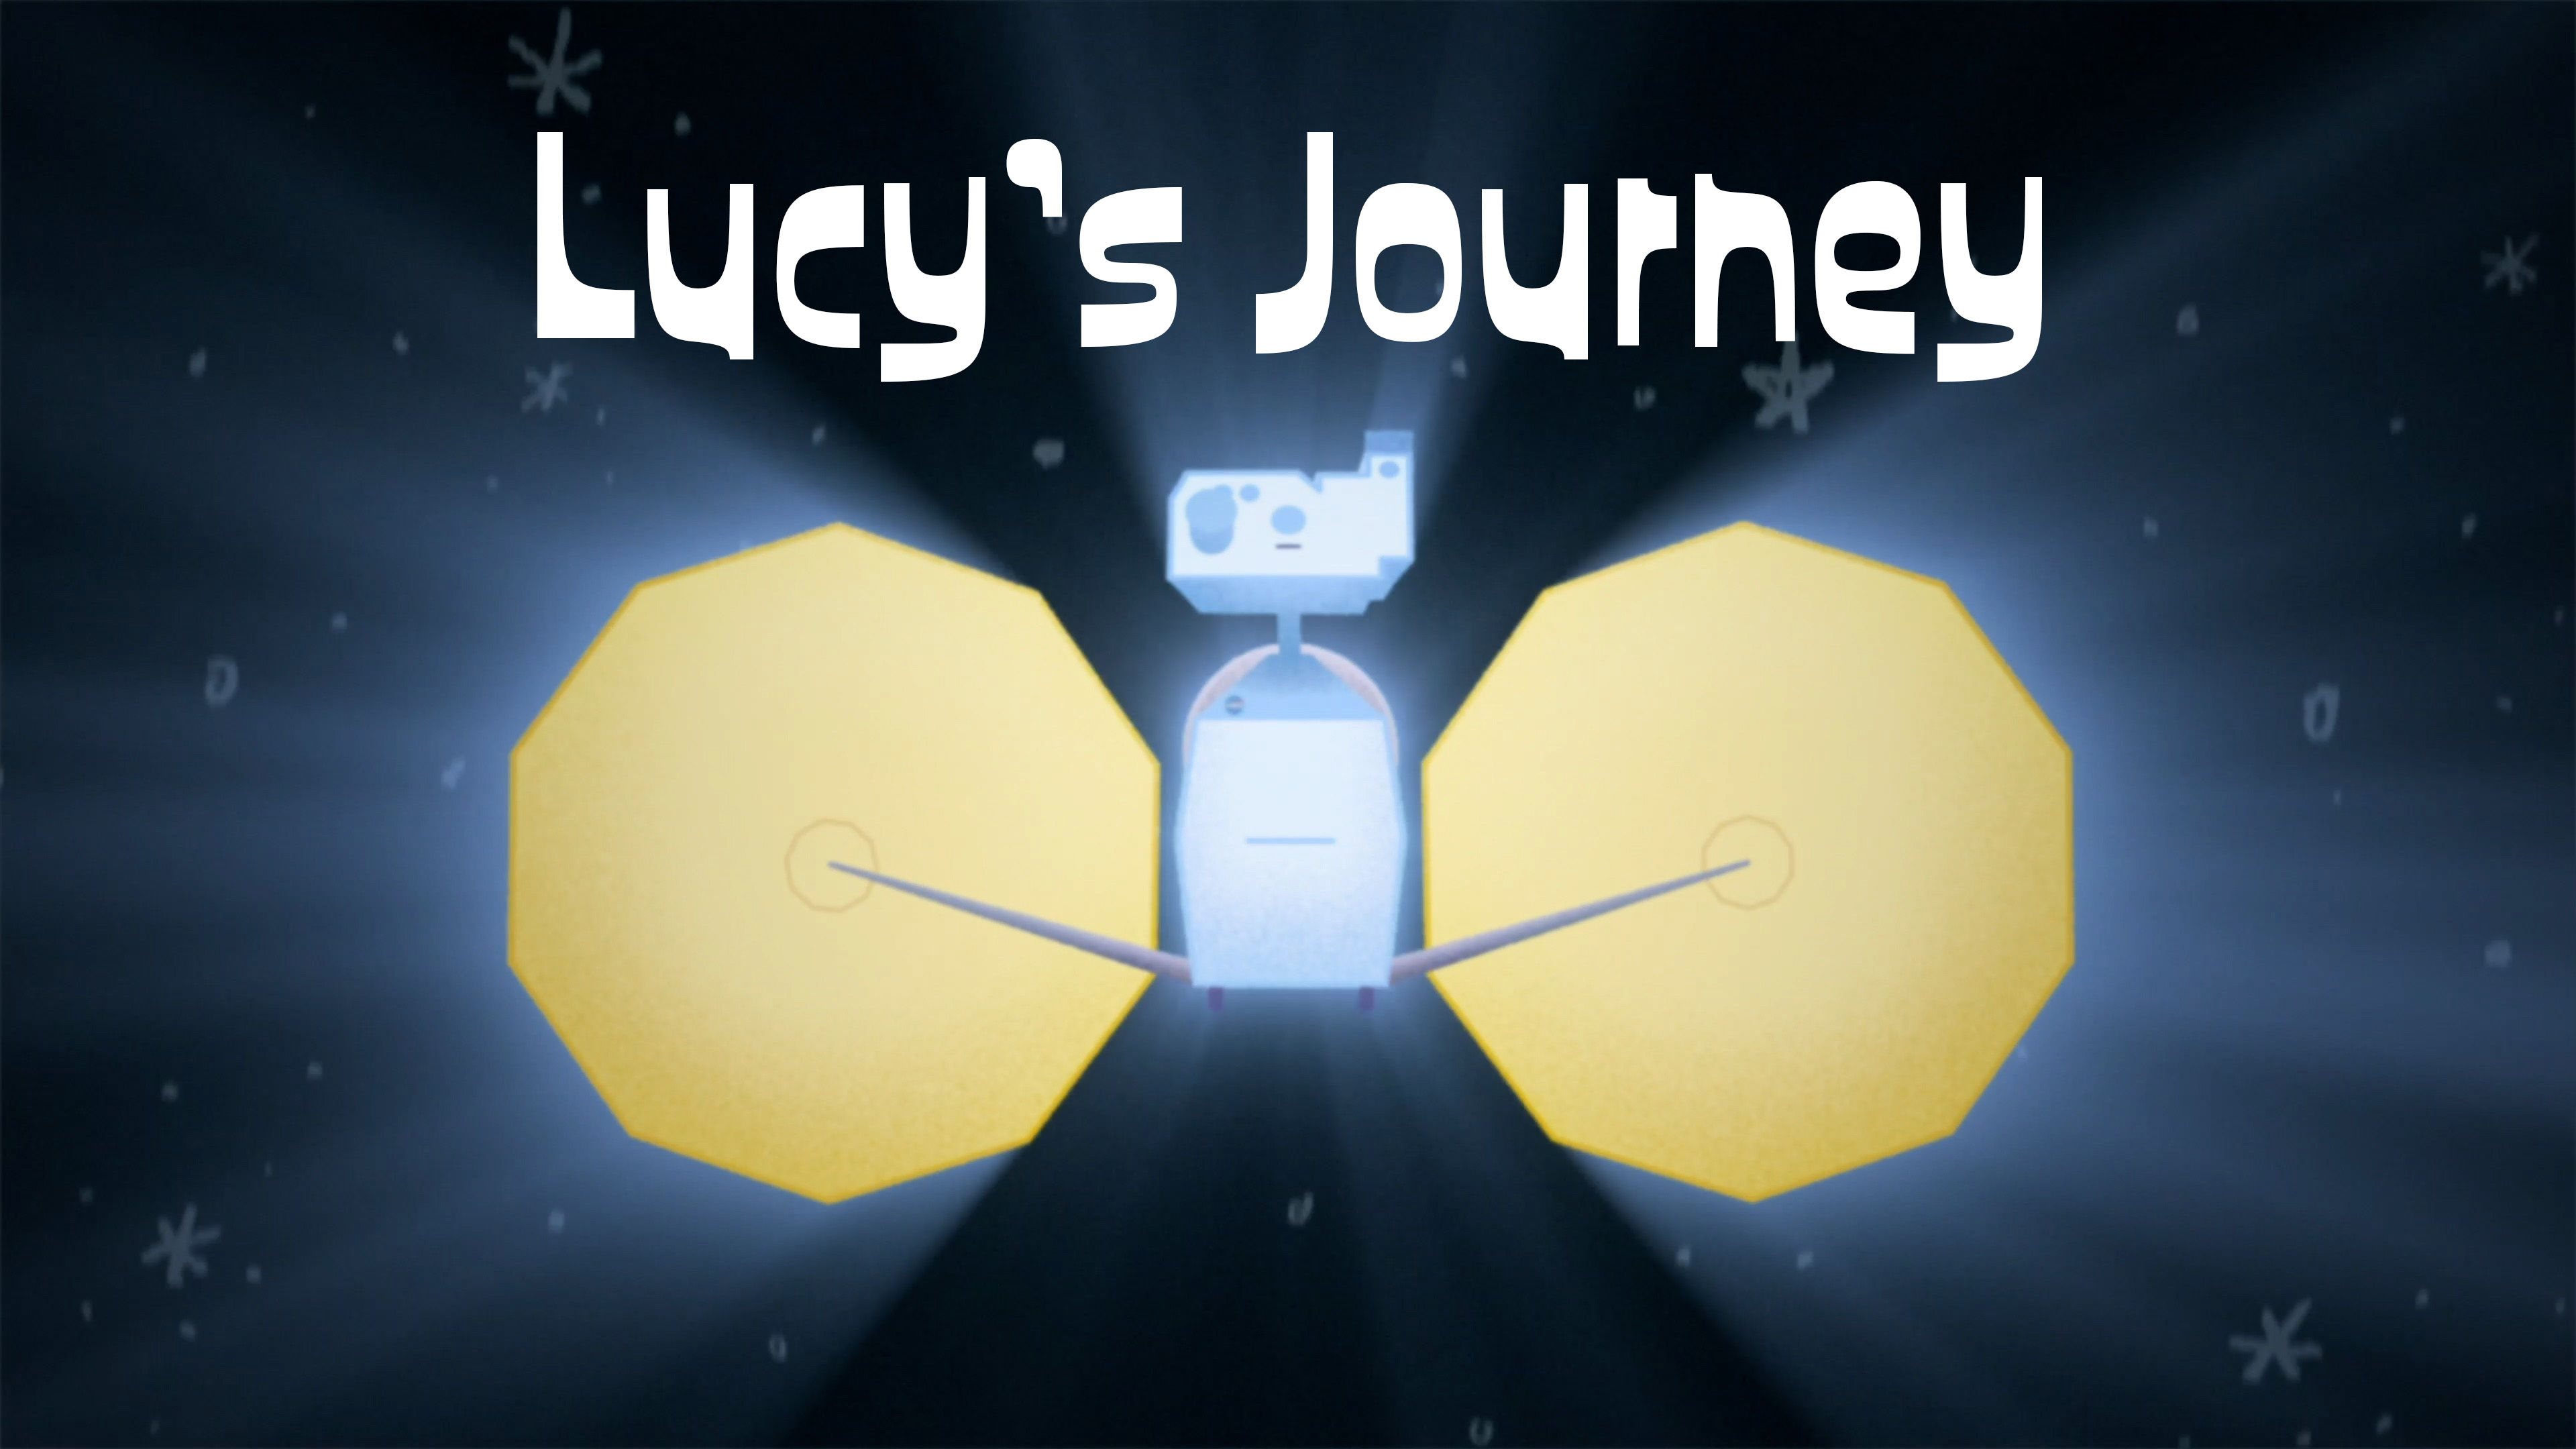 The full series of all the Lucy's Journey cartoons.<p><p>Music is "Fizzy and Witty" by Fabien Langard and Philippe Villar, "Lost in Space" by Arch Bacon, "Kitschorama" from Denny Savage and Henrik Lars Wikstrom, "Nip and Tuck" by Arch Bacon, "Lazy Days" by Arch Bacon, "Frantic Funk Out" by Anders Johan Greger Lewen, "Jewel" by Arnaud Rignon and Sebastien Langolff, "Shaken and Stirred" by Steve Martin, "Flying Squad" by Steve Martin and "Extra Terrestrial" by Michael Ellgren of Universal Production Music.<p><p><p><b>Watch this video on the <a href="https://youtu.be/5ZMcdg1WyXs" target="_blank" >NASA Goddard YouTube channel</a>.</b><p>